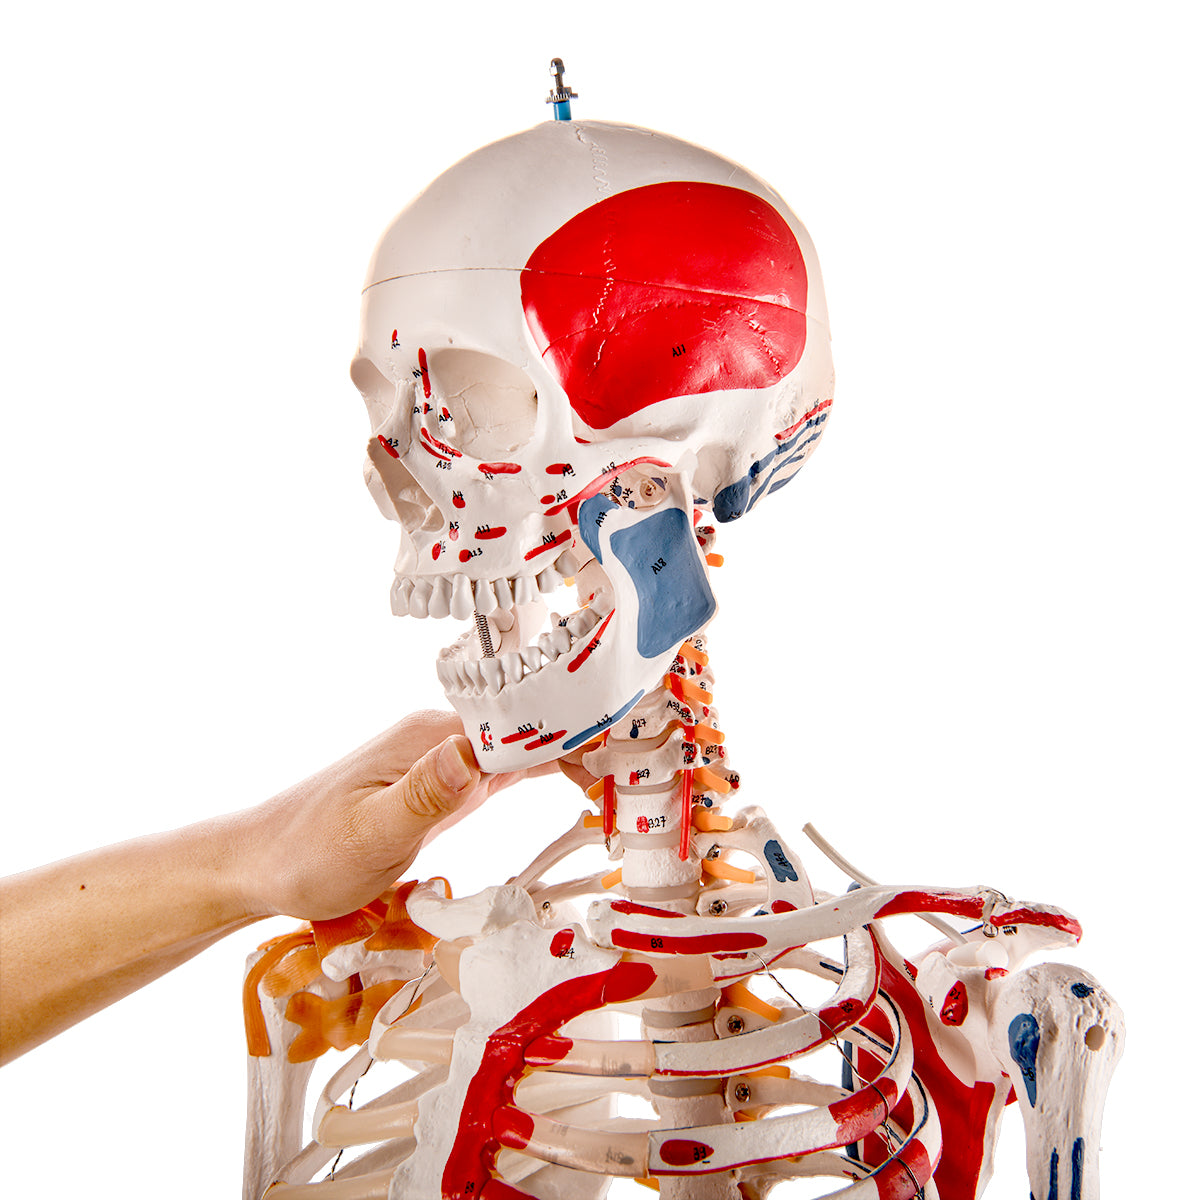 Evotech Scientific Flexible Painted and Numbered Life-Size Skeleton Anatomical Model with Flexible Spine, Muscle Insertion and Origin Points